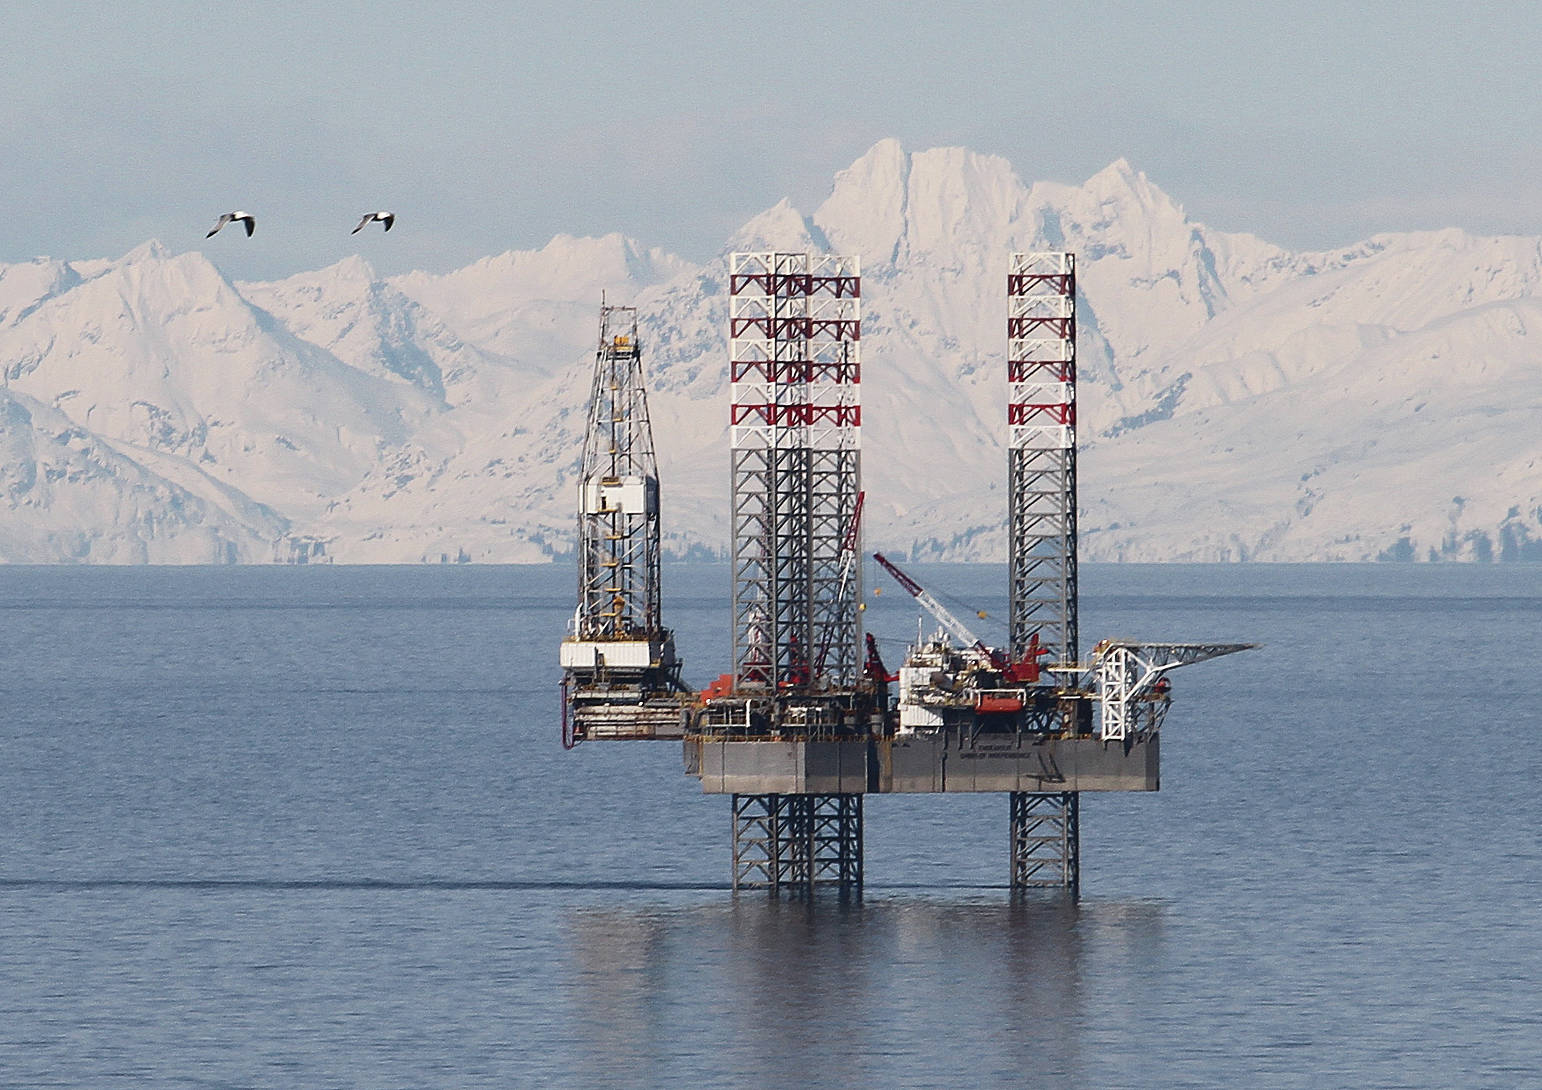 The Endeavour-Spirit of Independence jack up rig is seen here in early April 2013, at the Cosmopolitan site in lower Cook Inlet near Anchor Point, Alaska. (Photo by Brian Smith/Peninsula Clarion)